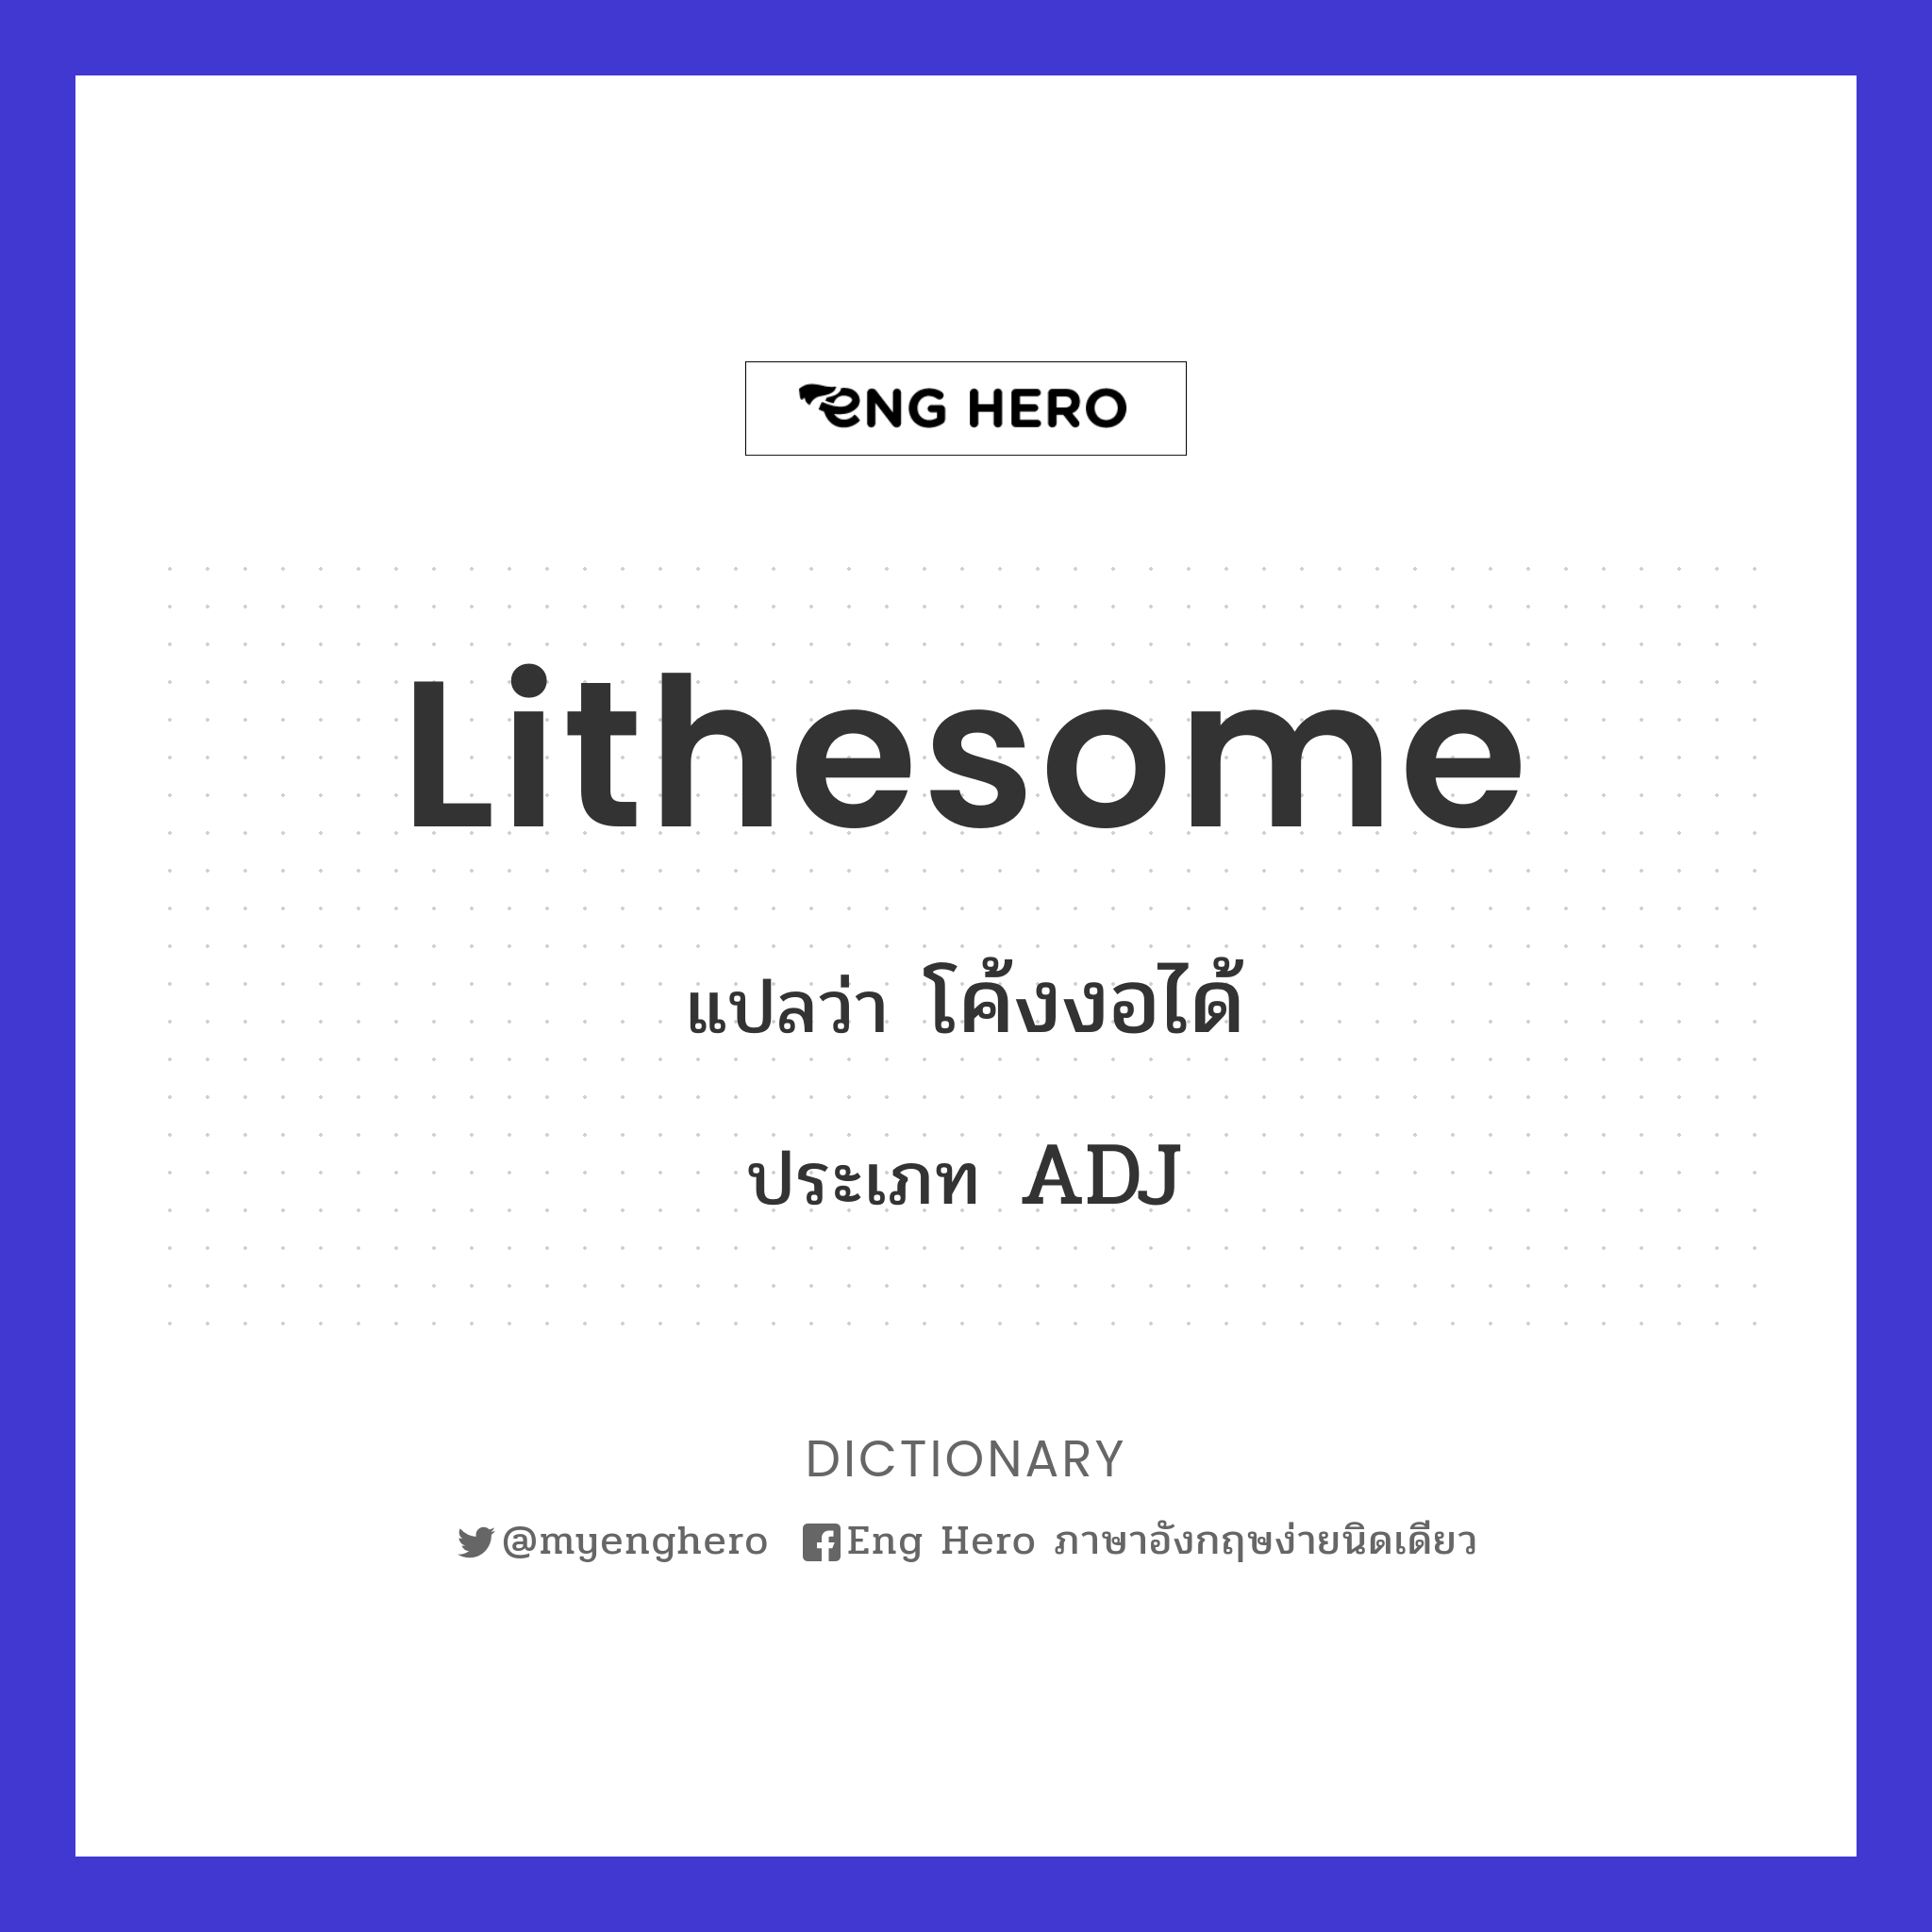 lithesome